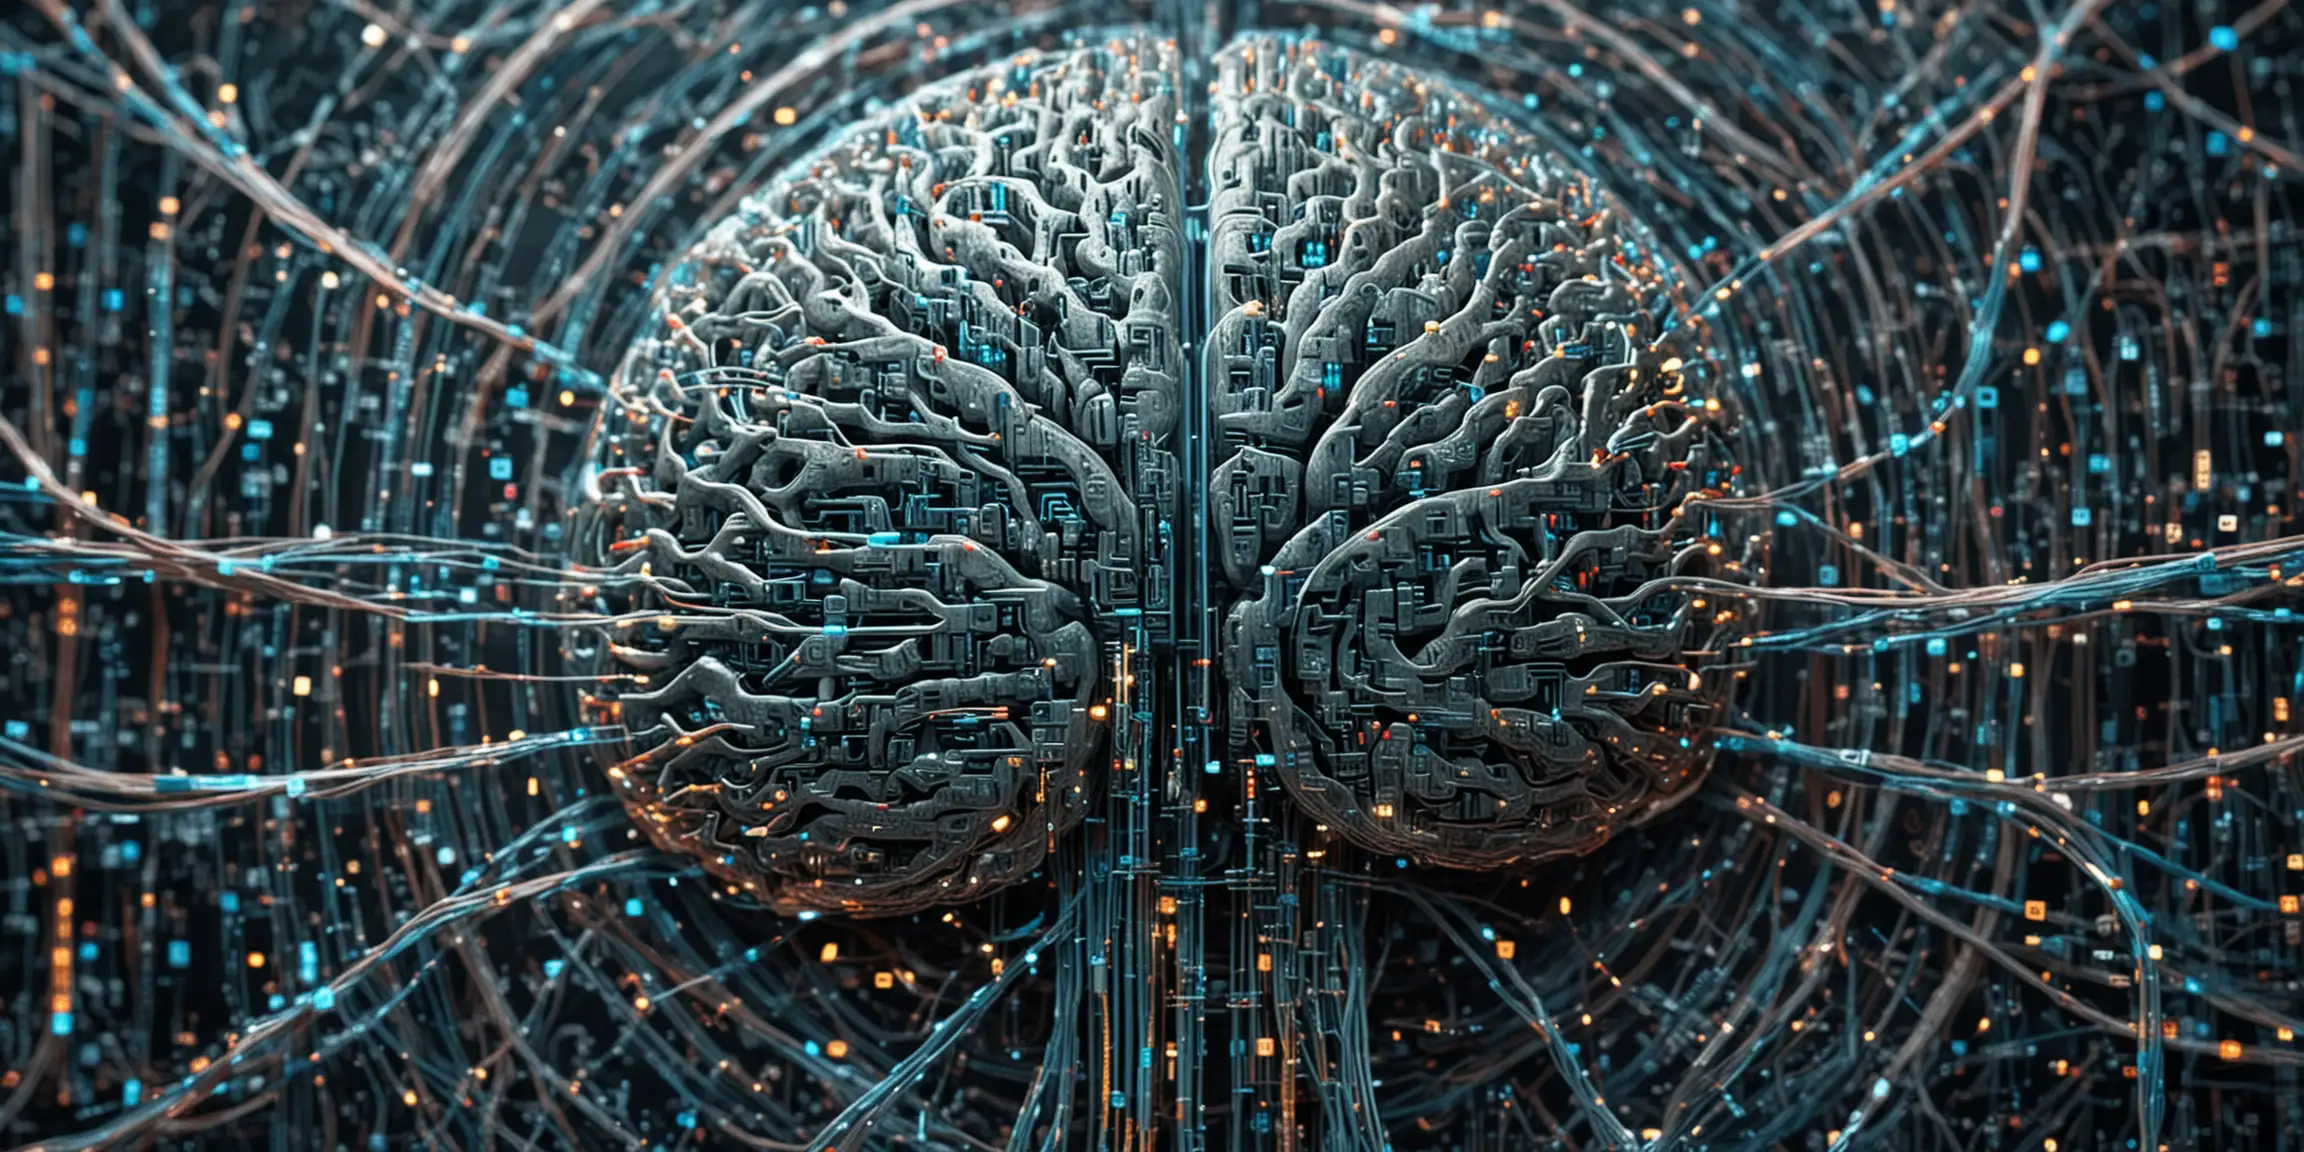 a close-up of a digital computer neural network web that is shaped like a brain inside of a computer, computerized digital neural networks, brain-computer interface, the coming AI singularity, screen computer digital neural network, integration of intelligence, neuromorphic chip, neurography, beautiful cosmic neural network web, artificial consciousness, artificial intelligence fully integrated inside the digital world, digital machine in an artificial digital world.